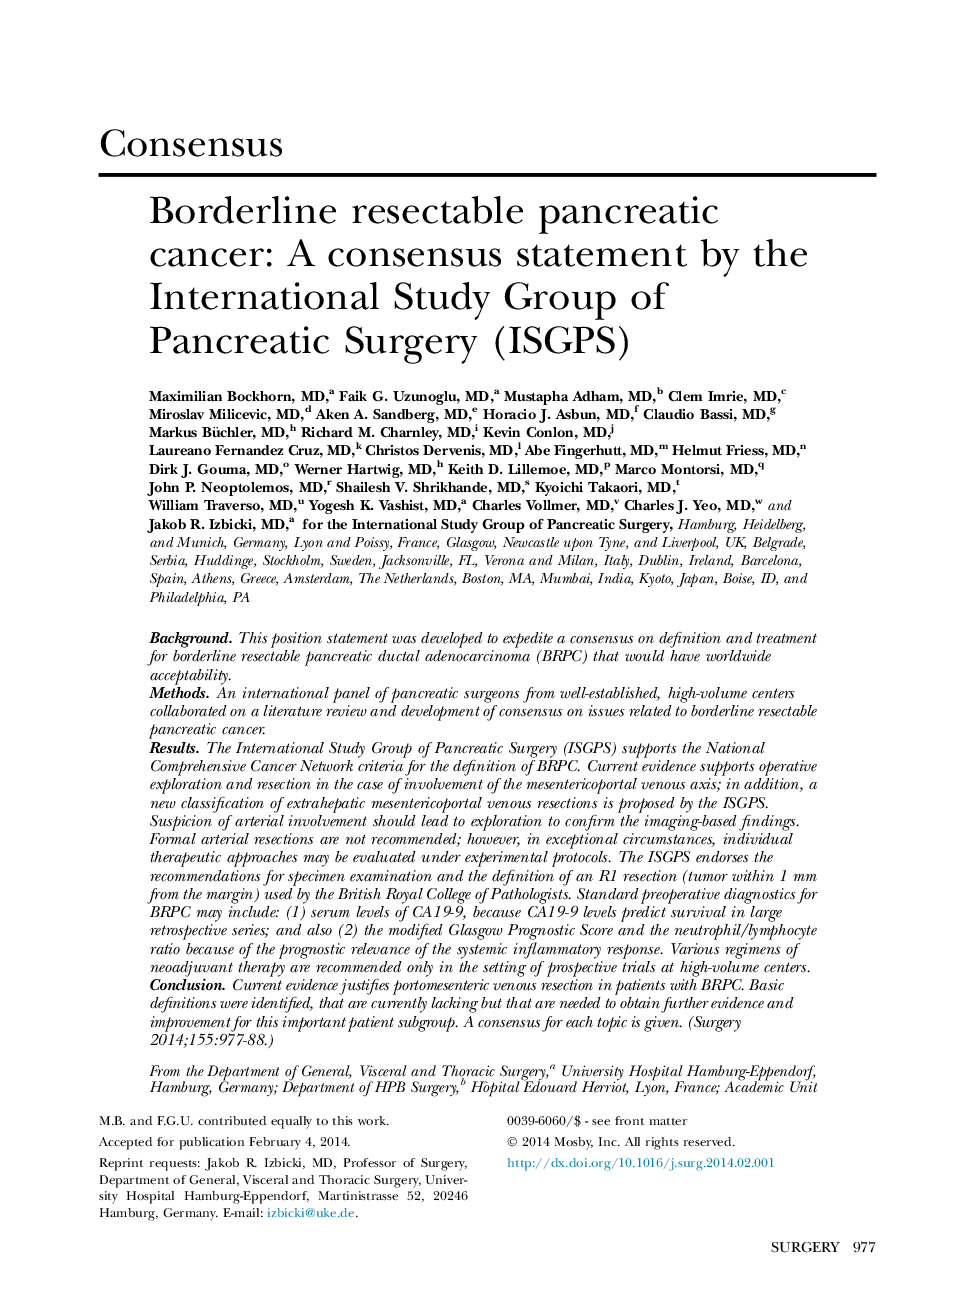 Borderline resectable pancreatic cancer: A consensus statement by the International Study Group of Pancreatic Surgery (ISGPS) 